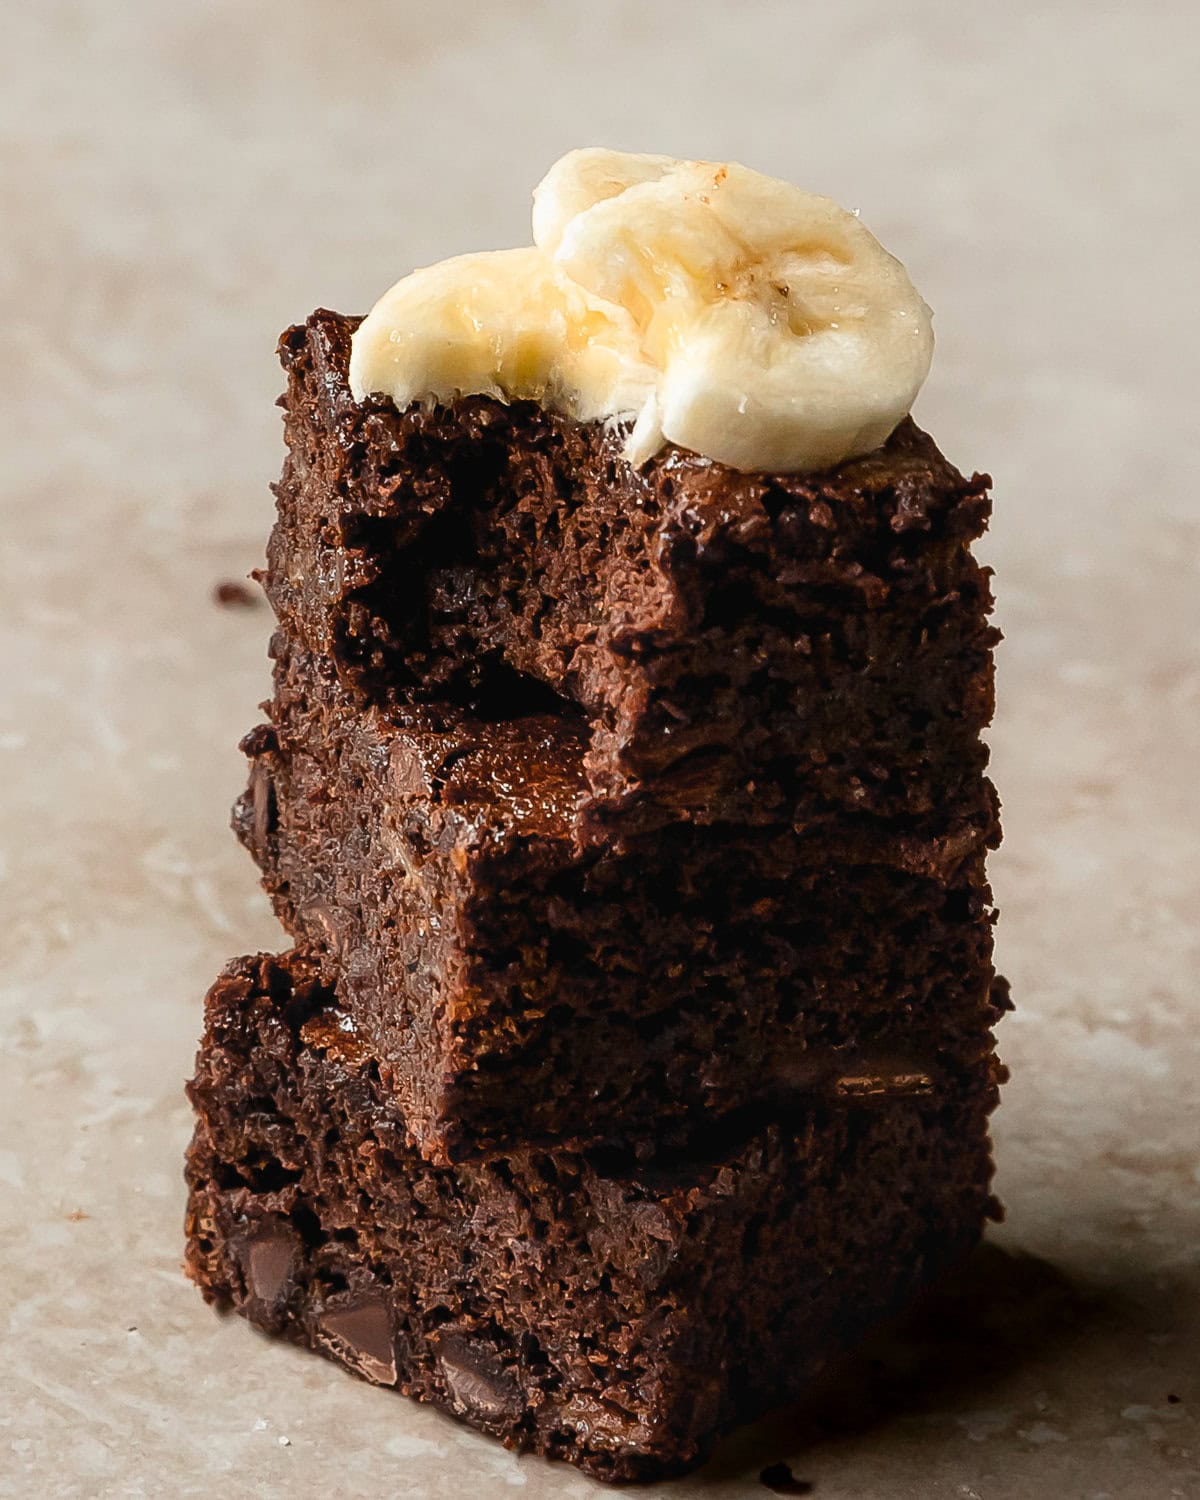 Banana brownies are rich, fudgy and chewy brownies made with creamy bananas. The indulgently deep chocolate flavor of the brownies is perfectly balanced with the subtle sweetness of ripe bananas and chocolate chips.  These banana flavored brownies are easy to make and are the perfect treat.